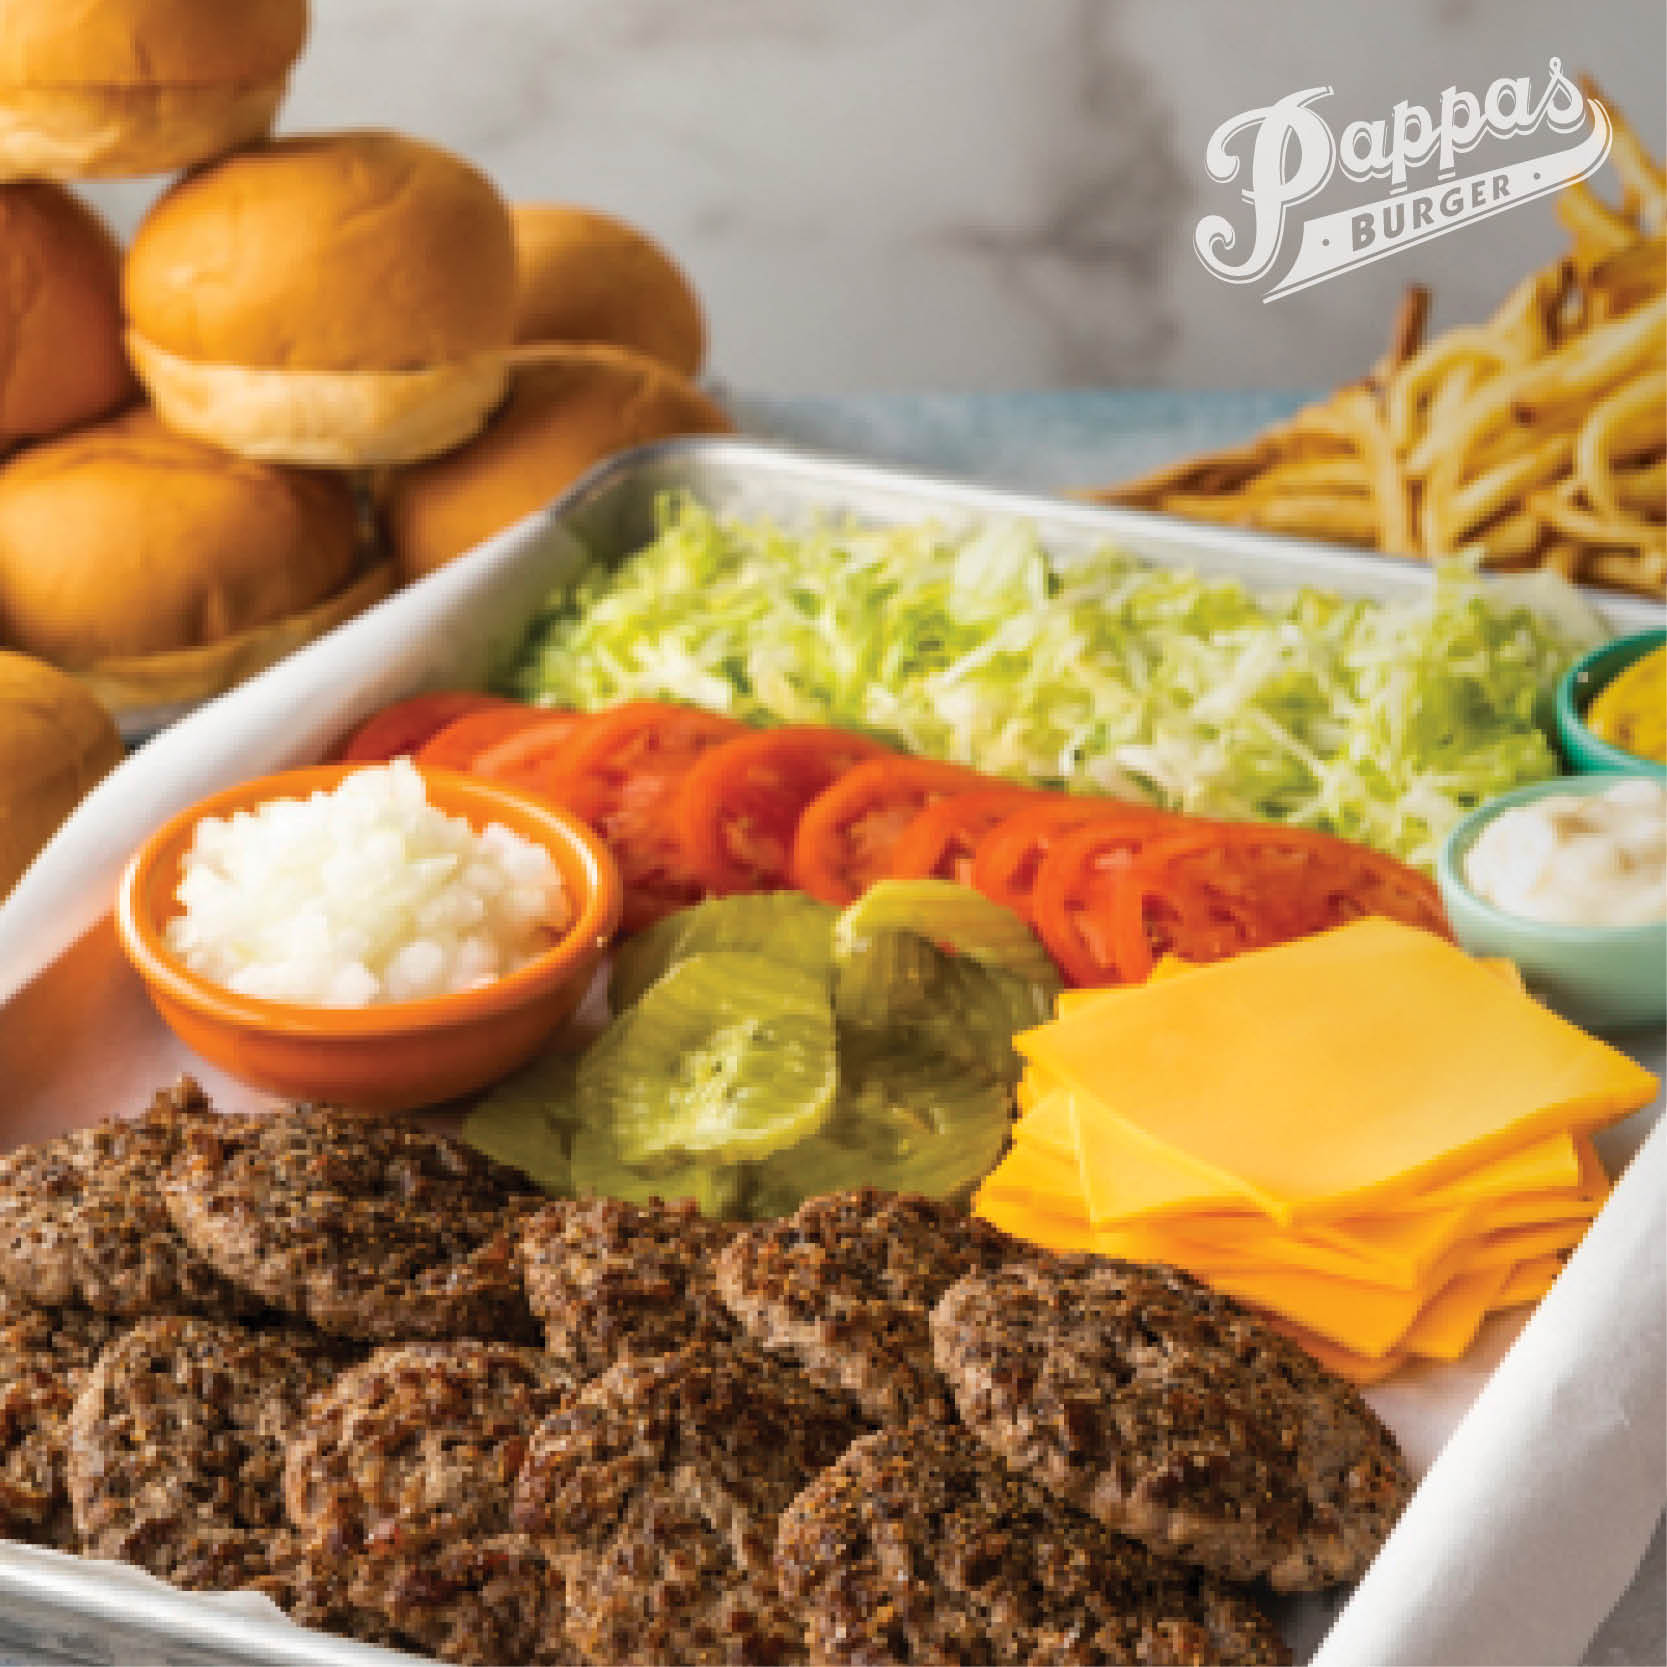 Pappas Burger on X: Burger with family & friends this holiday